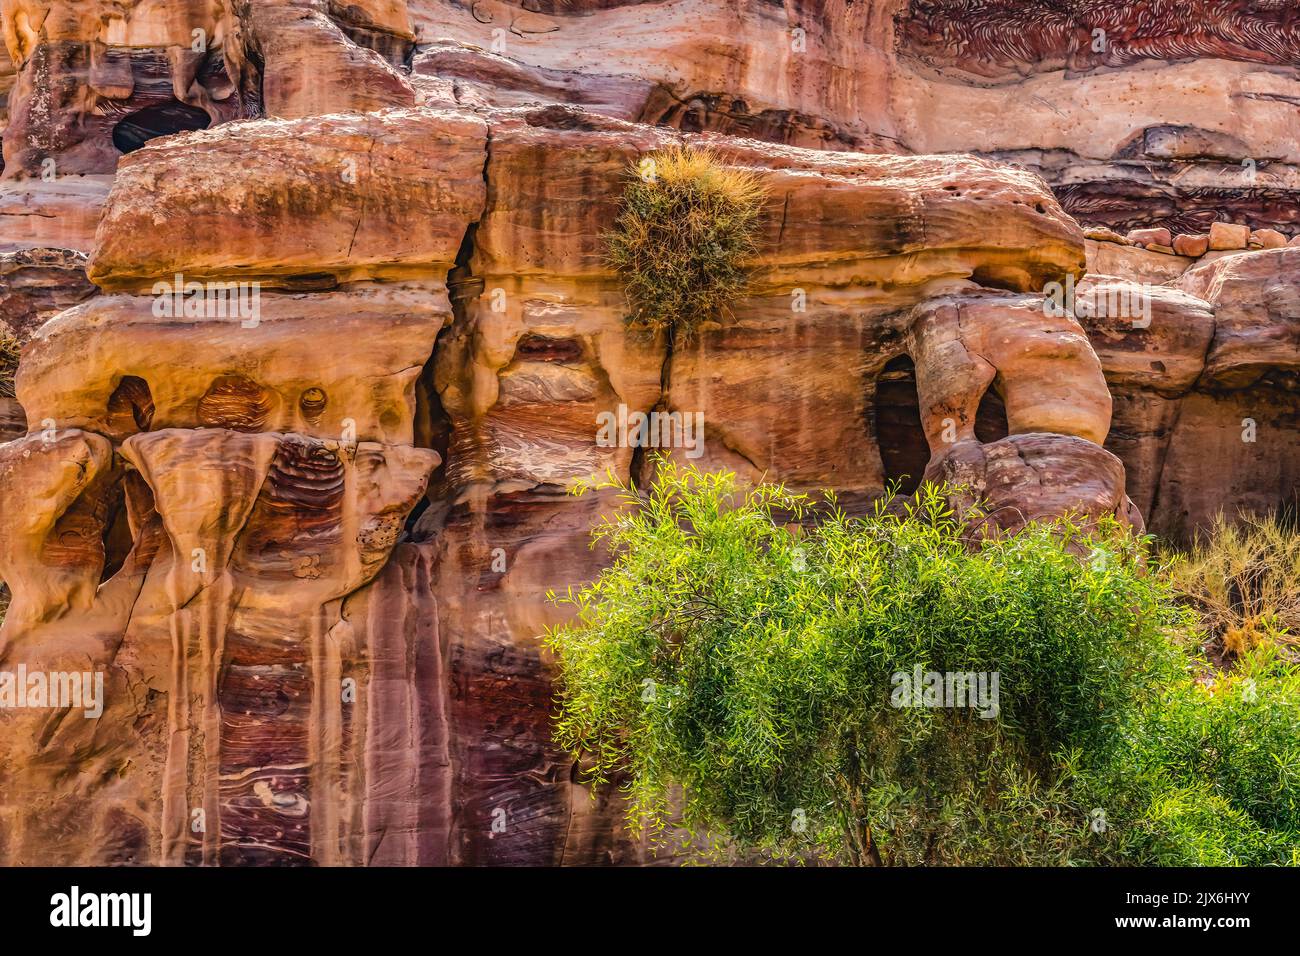 Rose Red Rock Tombs Morning Street of Facades Petra Jordan Built by Nabataens in 200 BC to 400 AD Canyon walls change Rose Red afternoon when sun goes Stock Photo